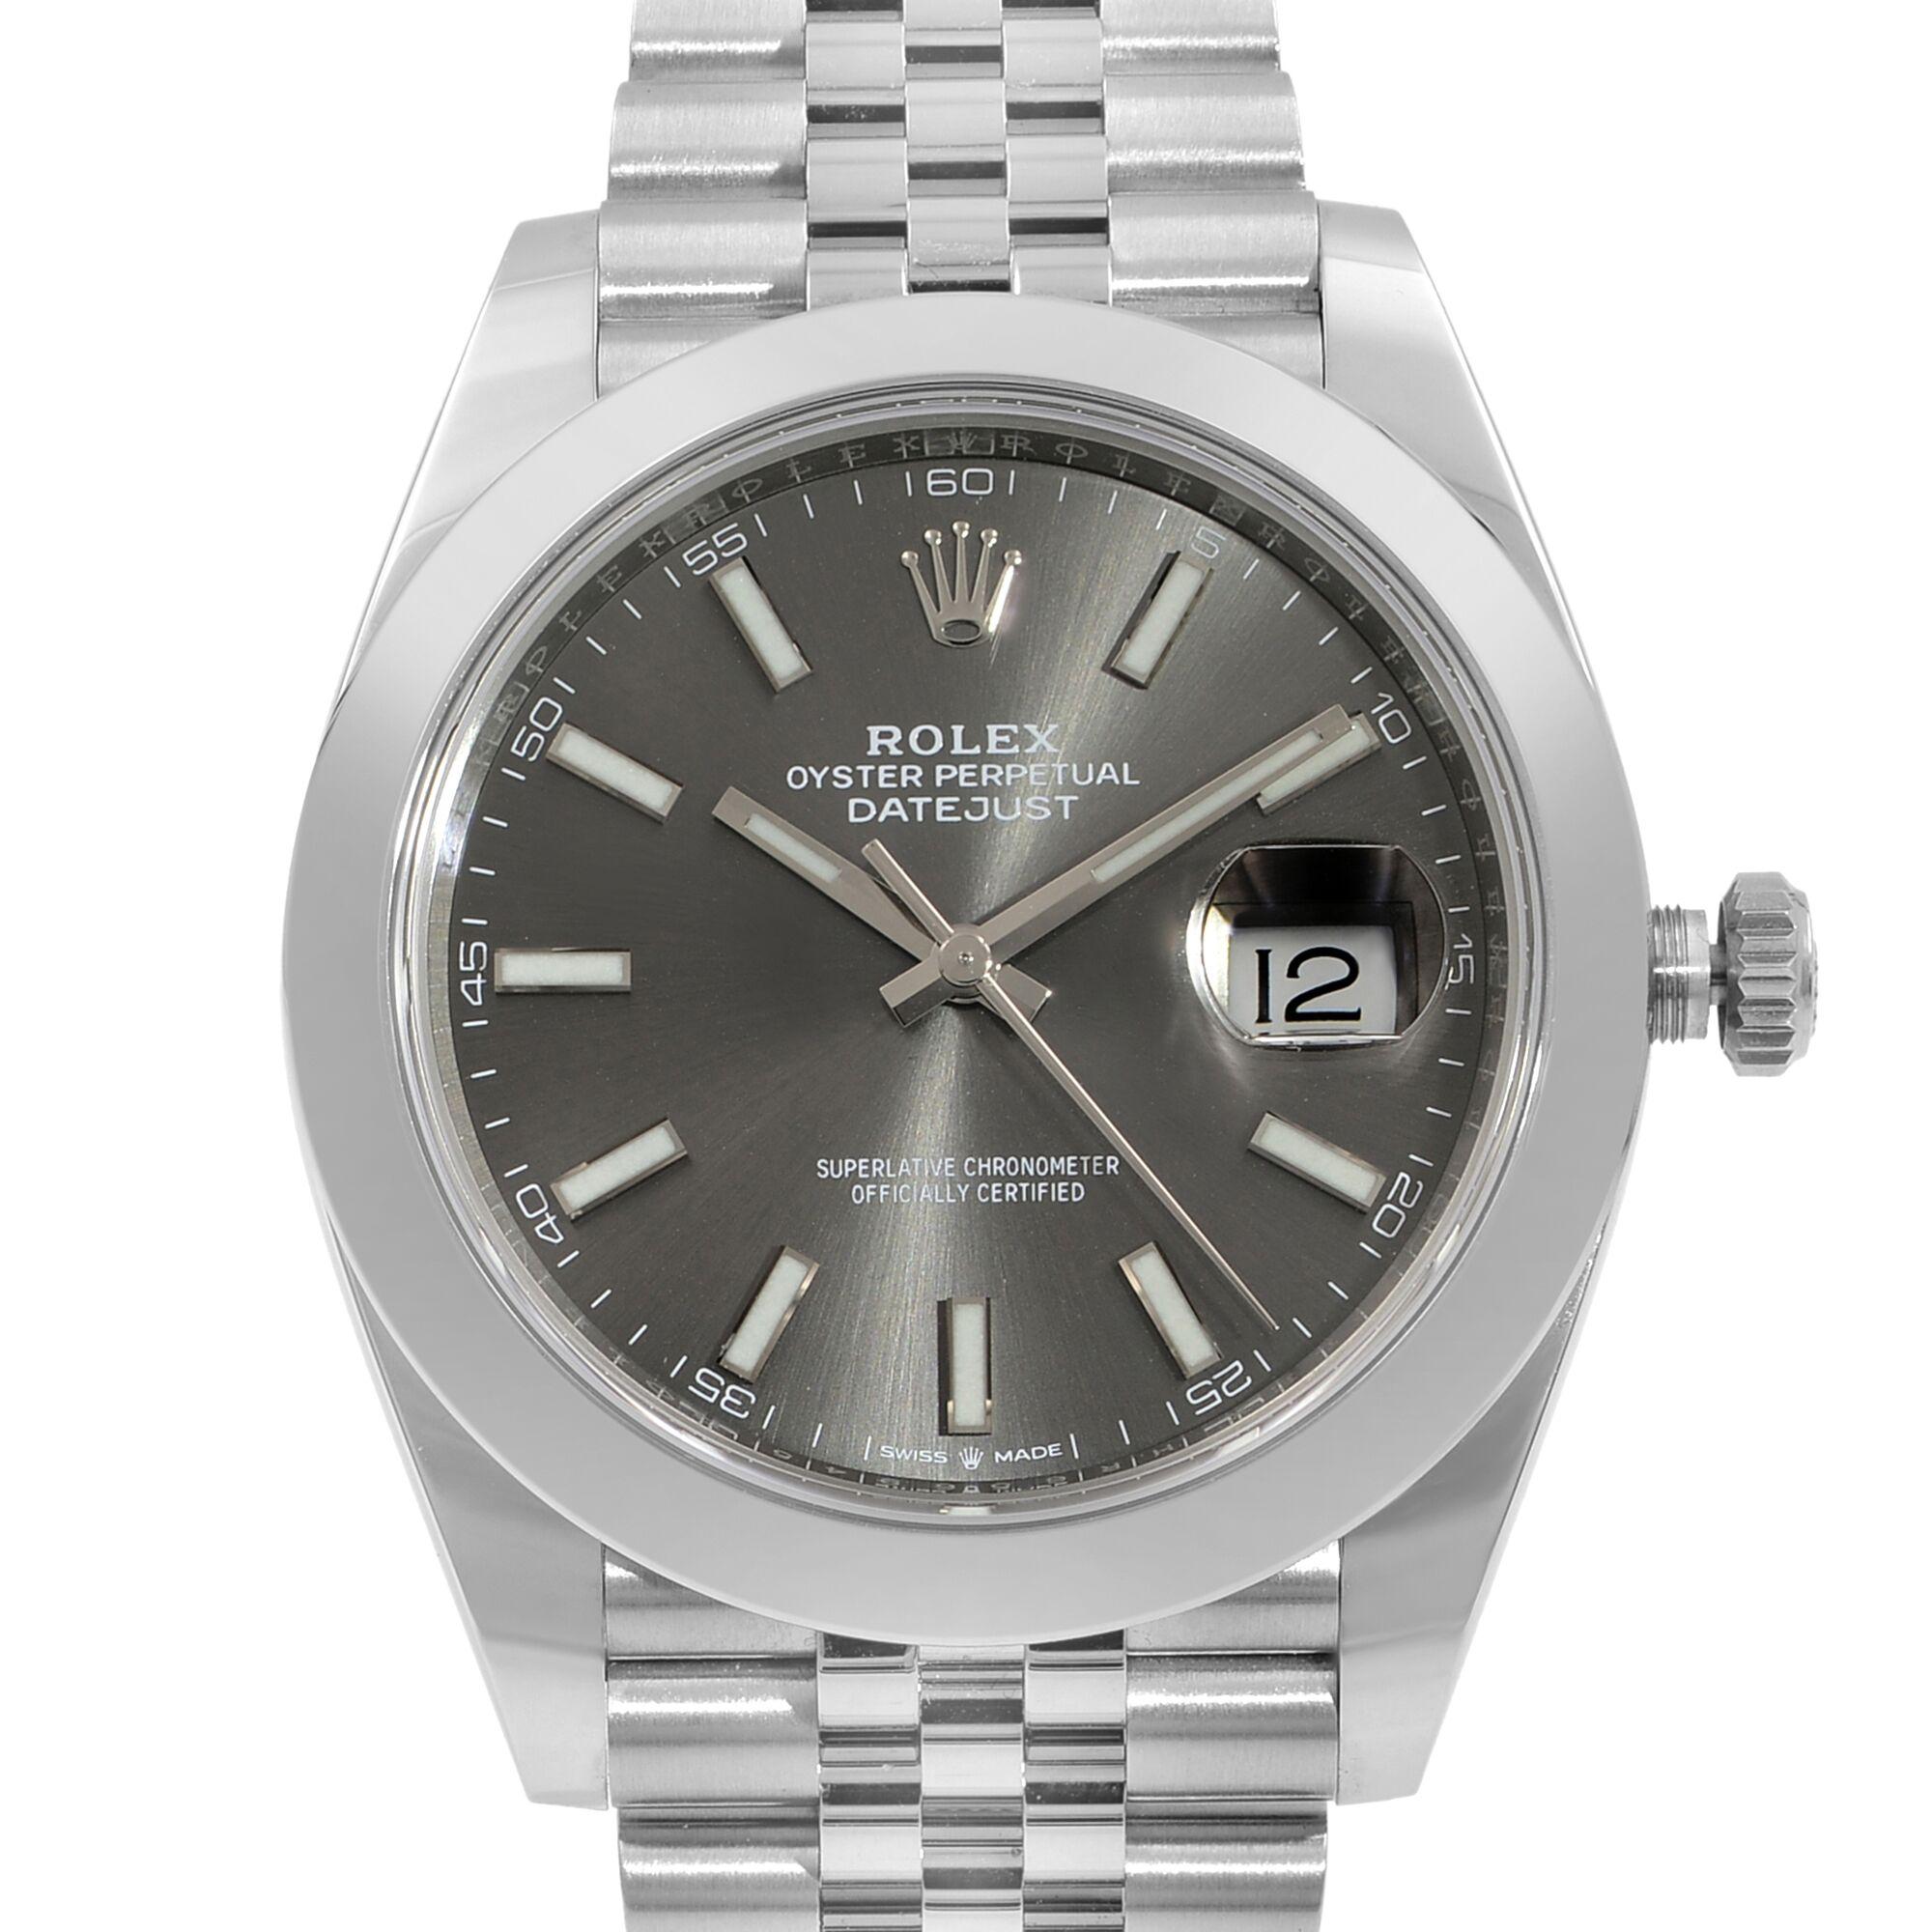 Pre-owned. Great condition. 2022 card. Box and papers included. 3-year warranty.

General Information
Brand: Rolex
Model: Datejust 126300
Department: Men
Style: Luxury
Vintage: No
Country/Region of Manufacture: Switzerland
Movement
Type: Mechanical